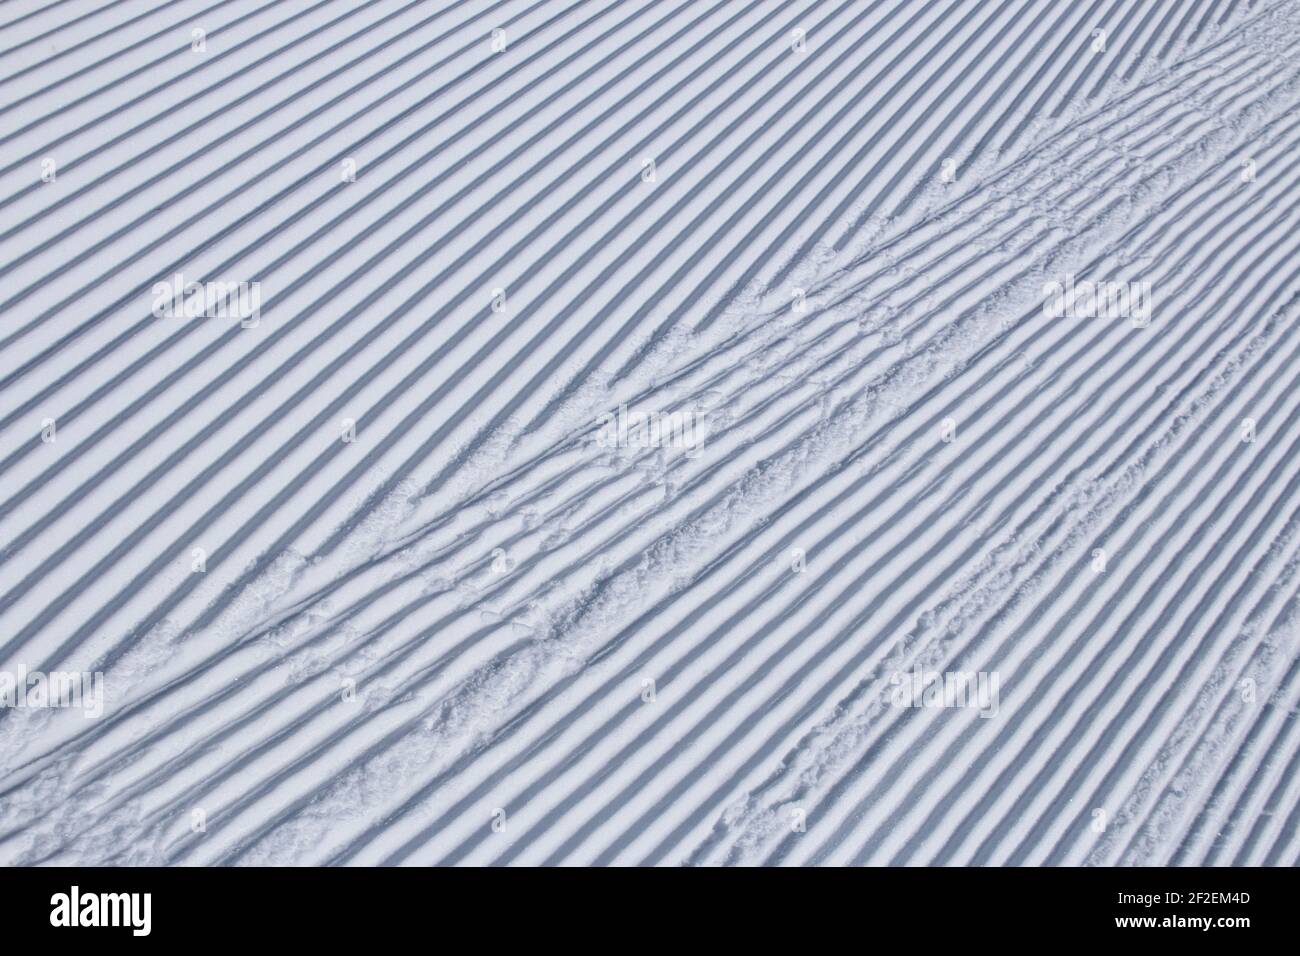 Parallel lines in freshly groomed snow at a ski resort Stock Photo